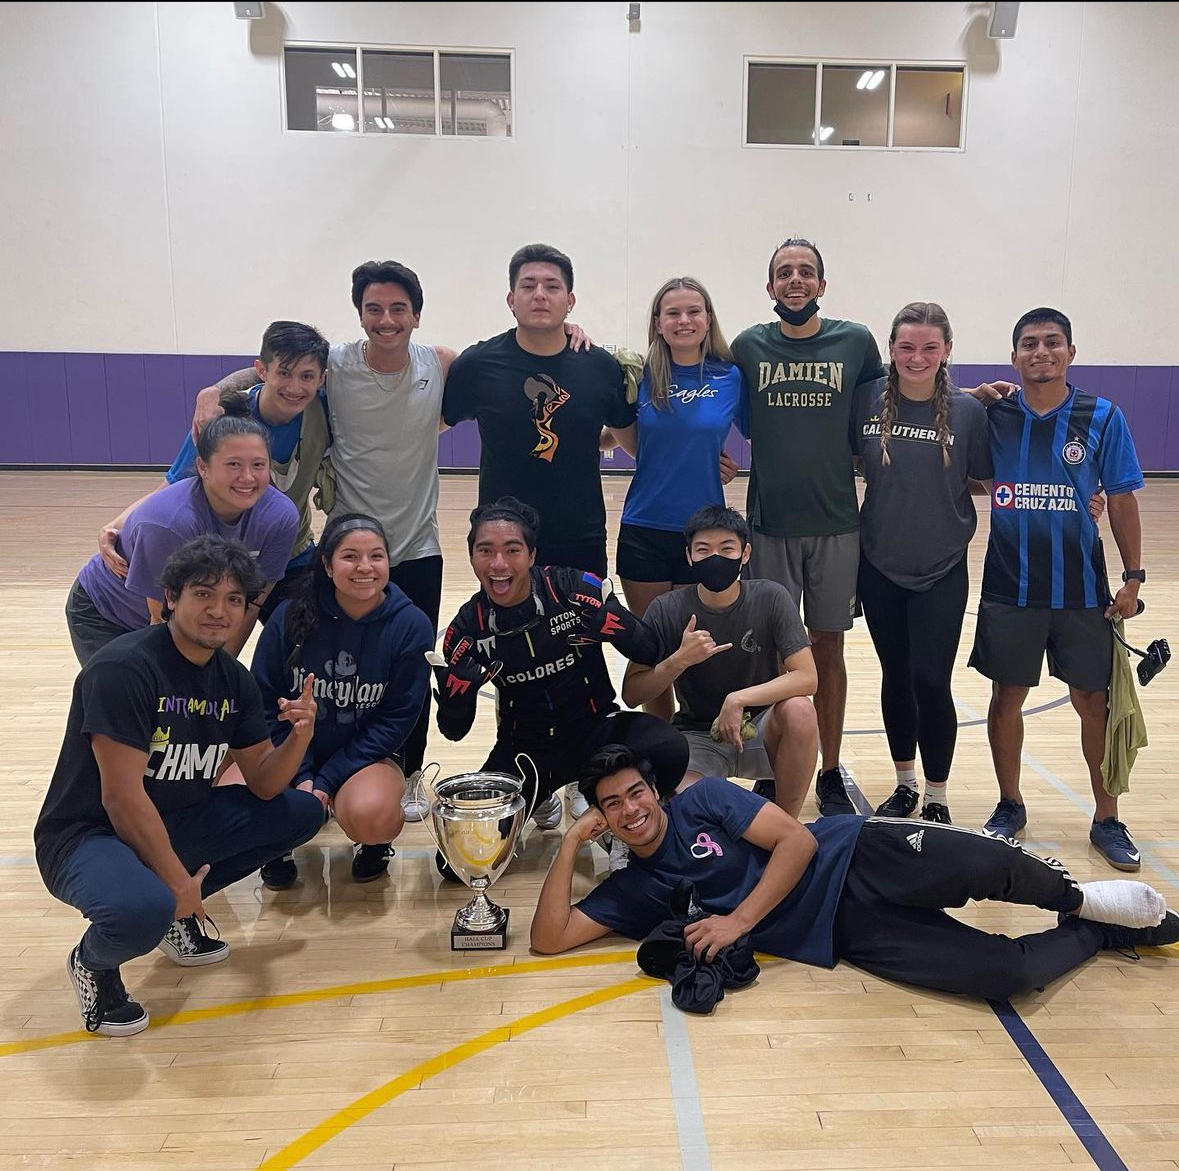 Intramural+soccer+team%2C+Smurfs+Pt.+4%2C+poses+for+a+photo+after+winning+their+tournament.+